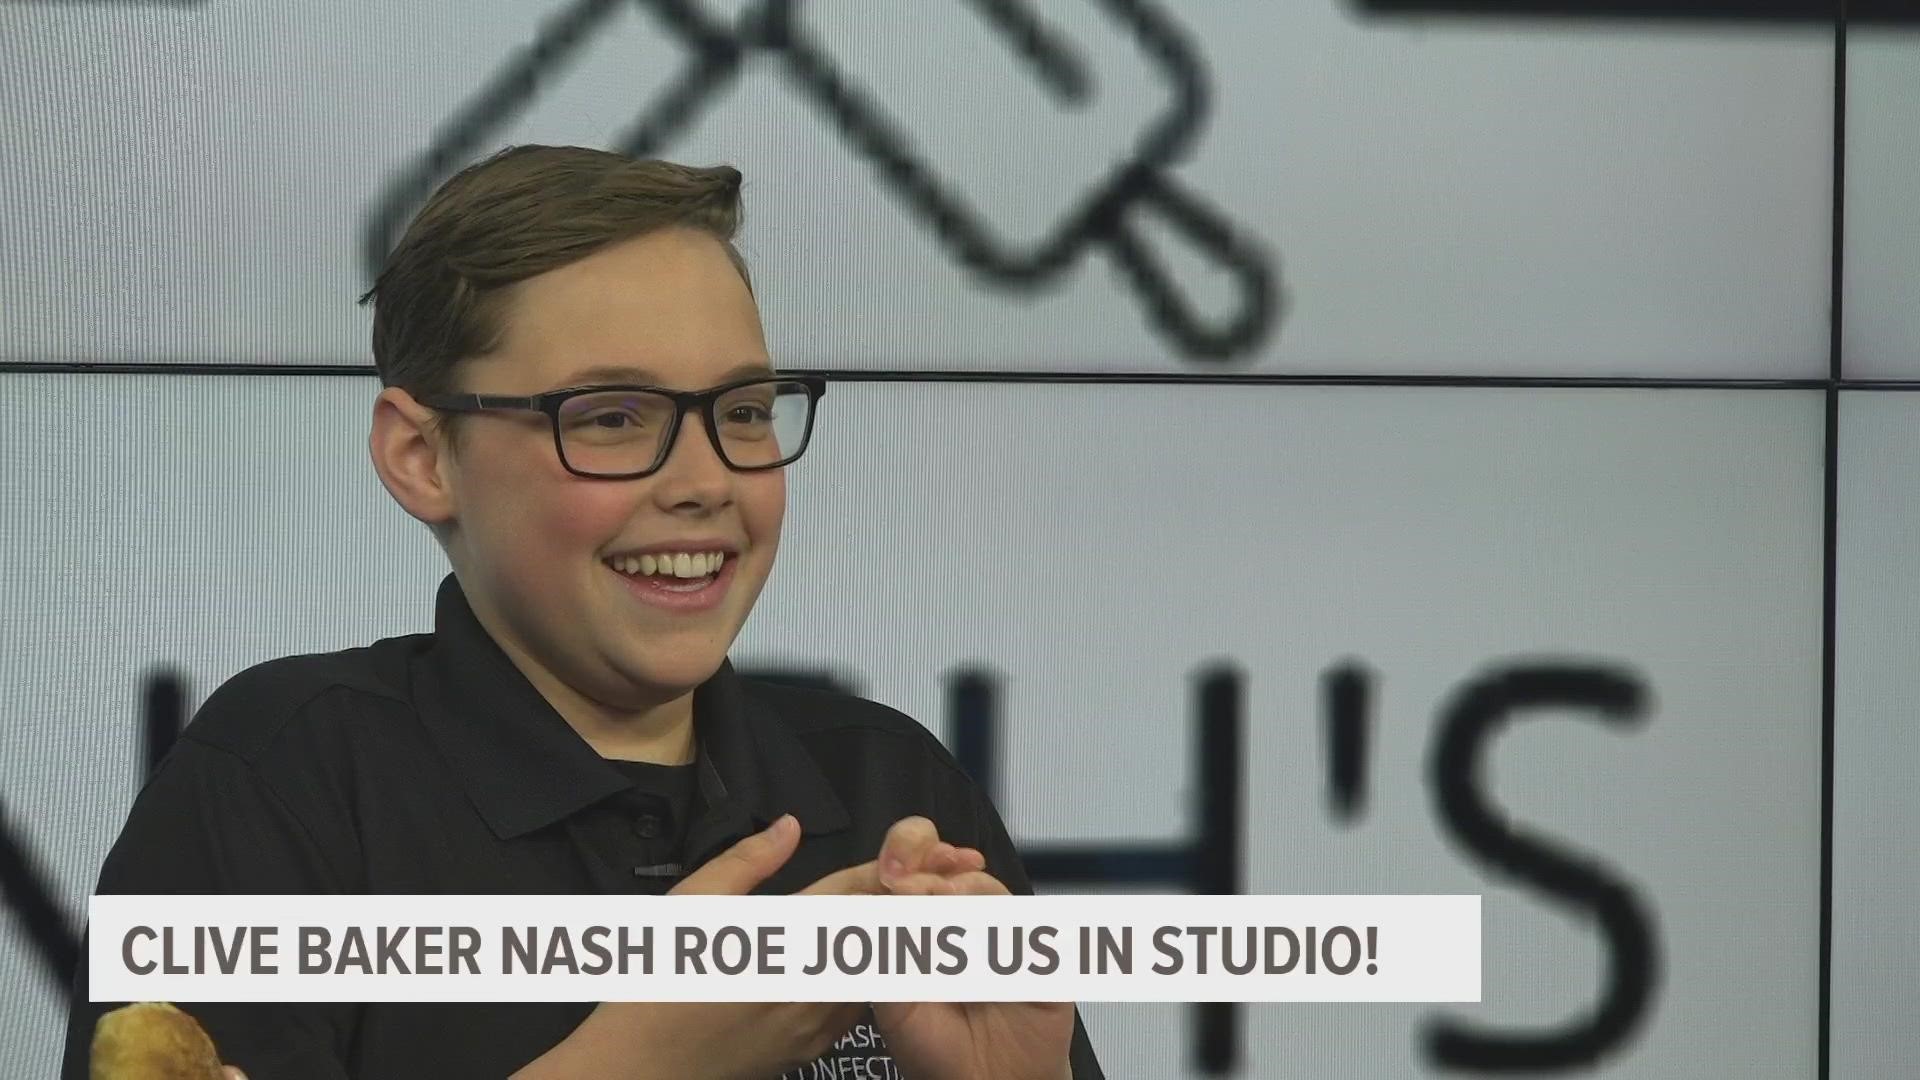 Nash competed on season 11 of the Kids Baking Championship "Biz Kids" on Food Network. Now, he's planning pop-up events and cooking classes around the metro.